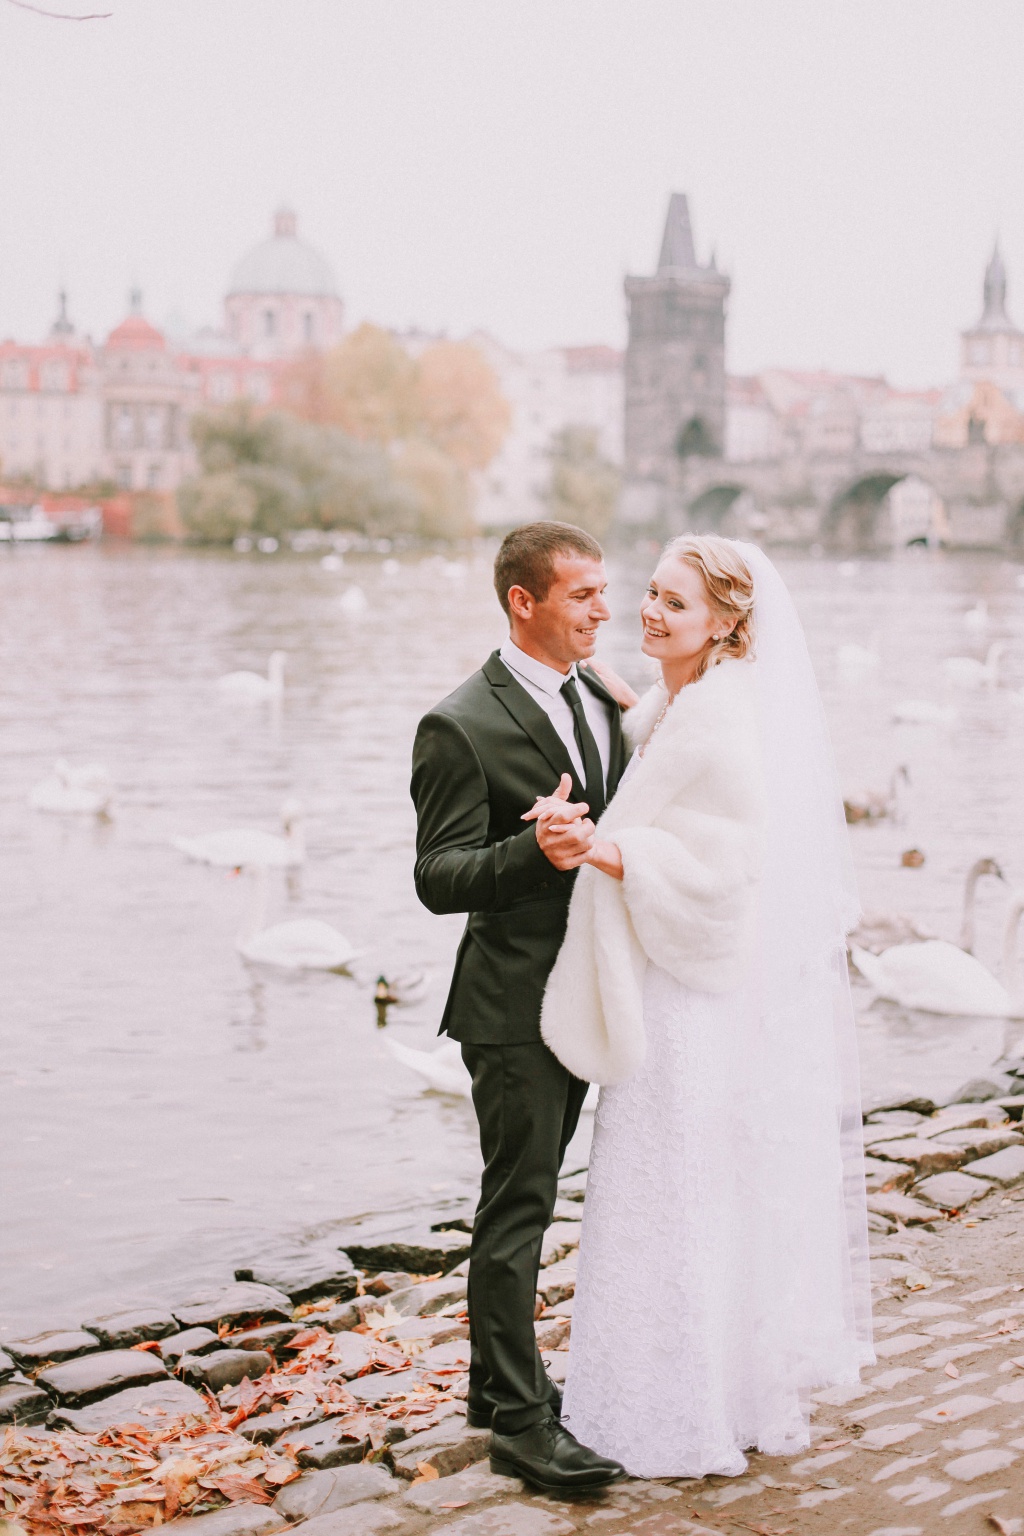 Prague Wedding Photoshoot in Autumn At Old Town Square, Charles Bridge And Astronomical Clock by Vickie  on OneThreeOneFour 8